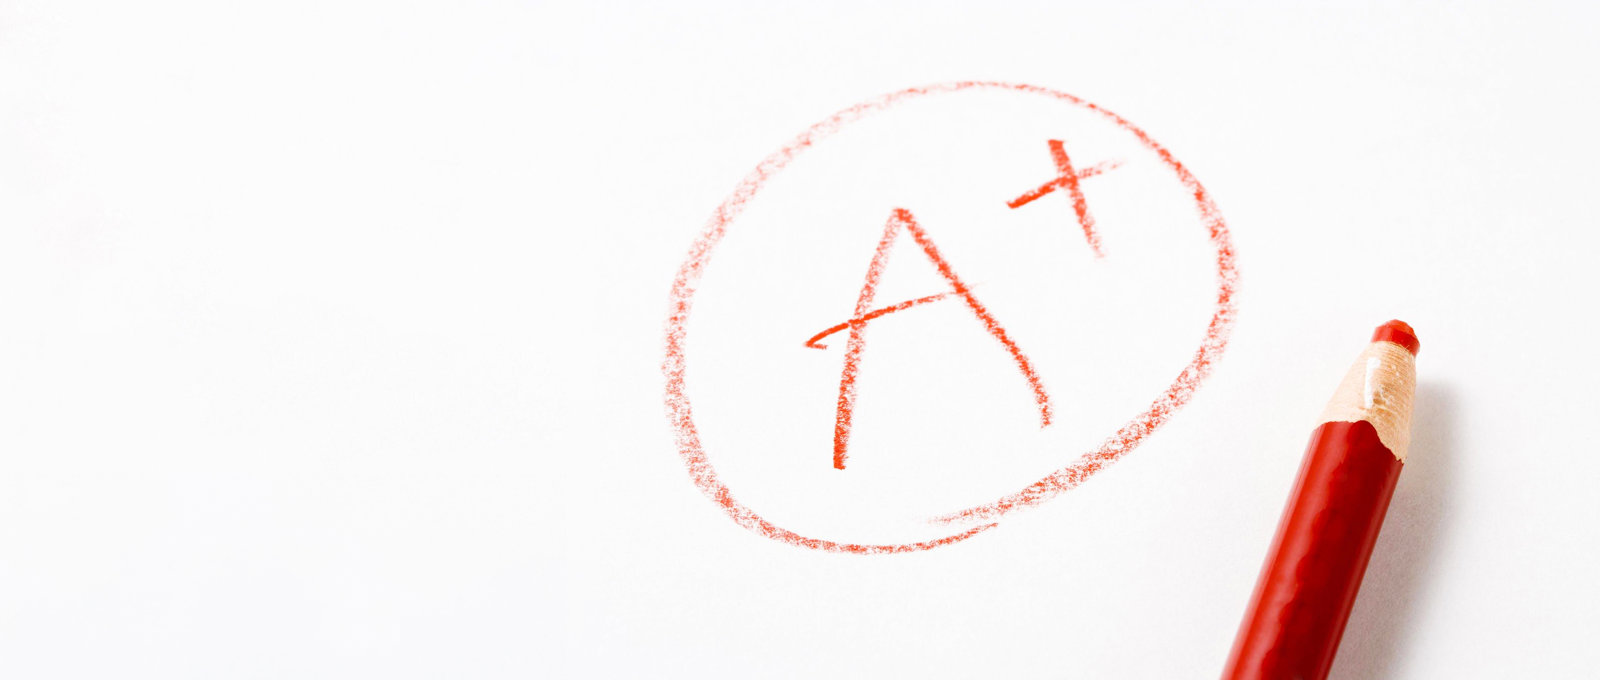 Photo of 'A+' written in red pencil on white paper with the pencil lying next to the writing